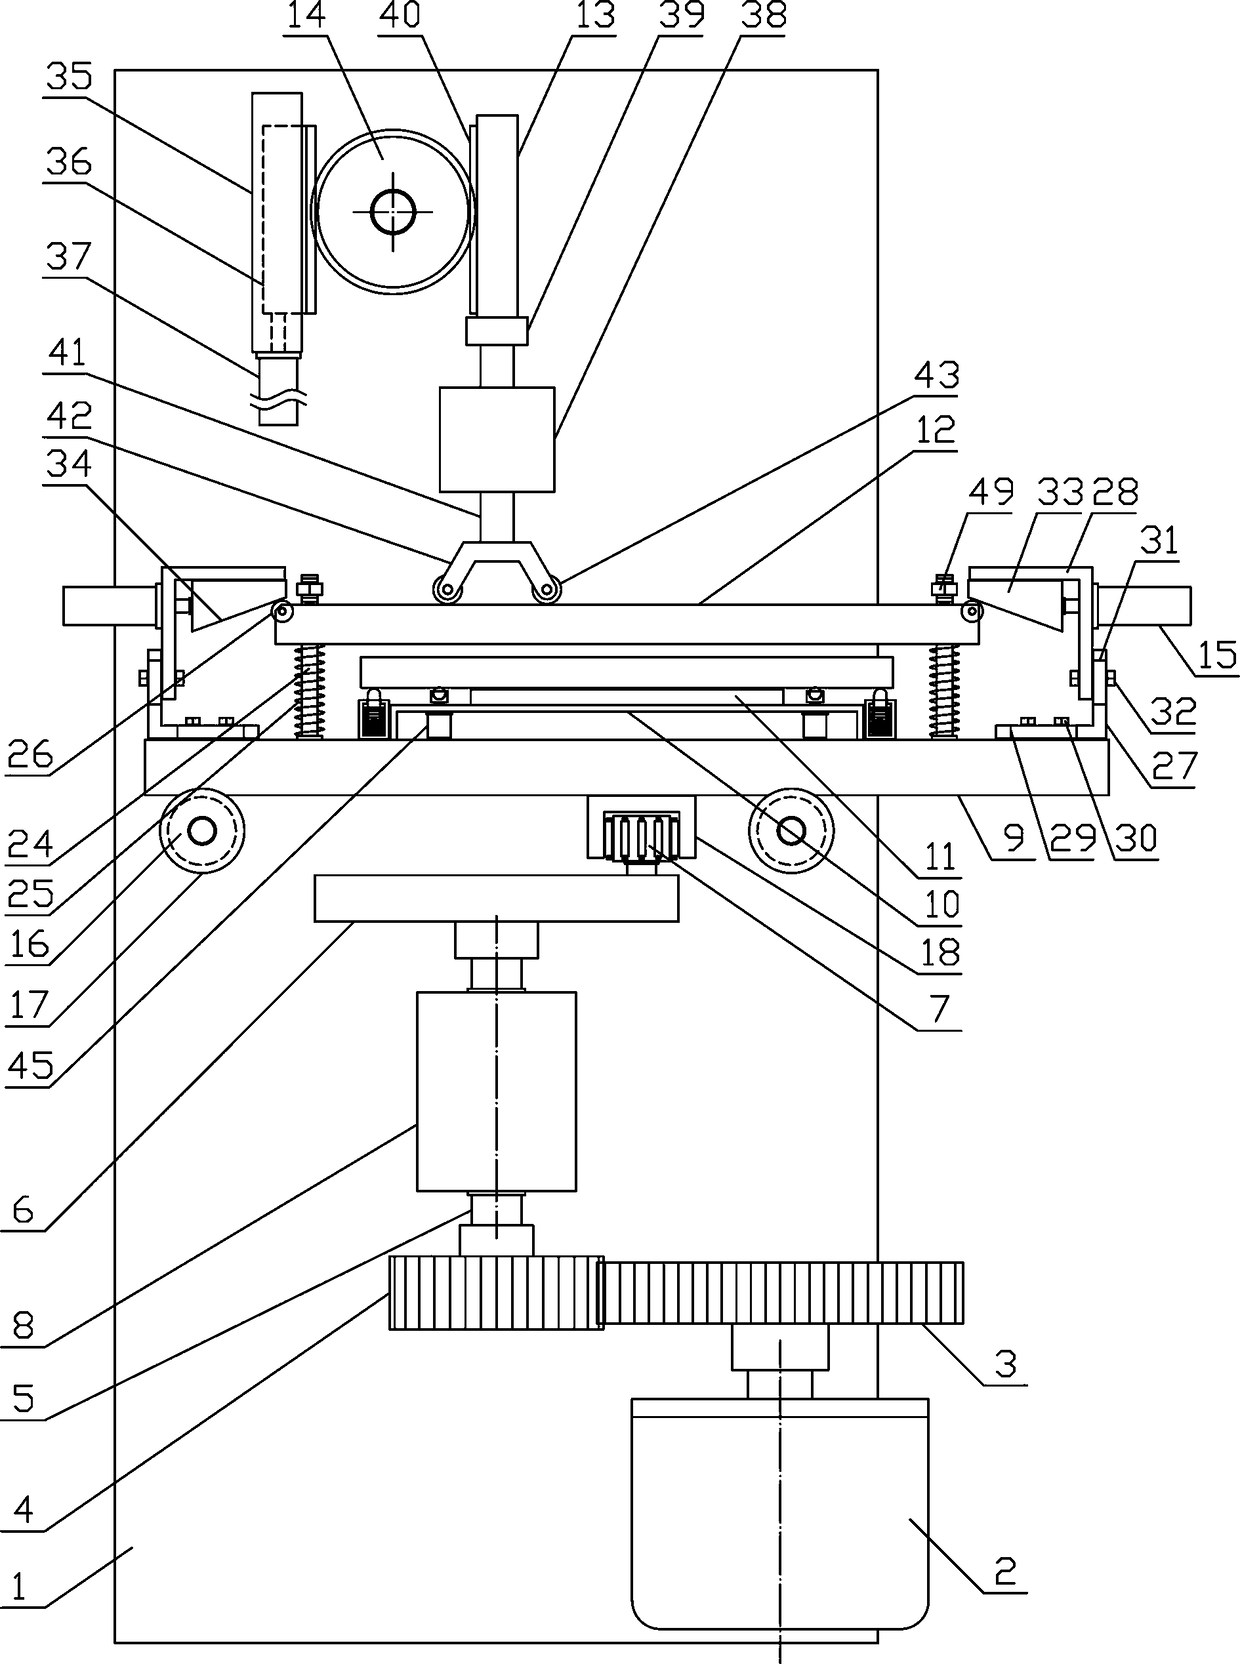 Continuous reciprocating stamping mechanism